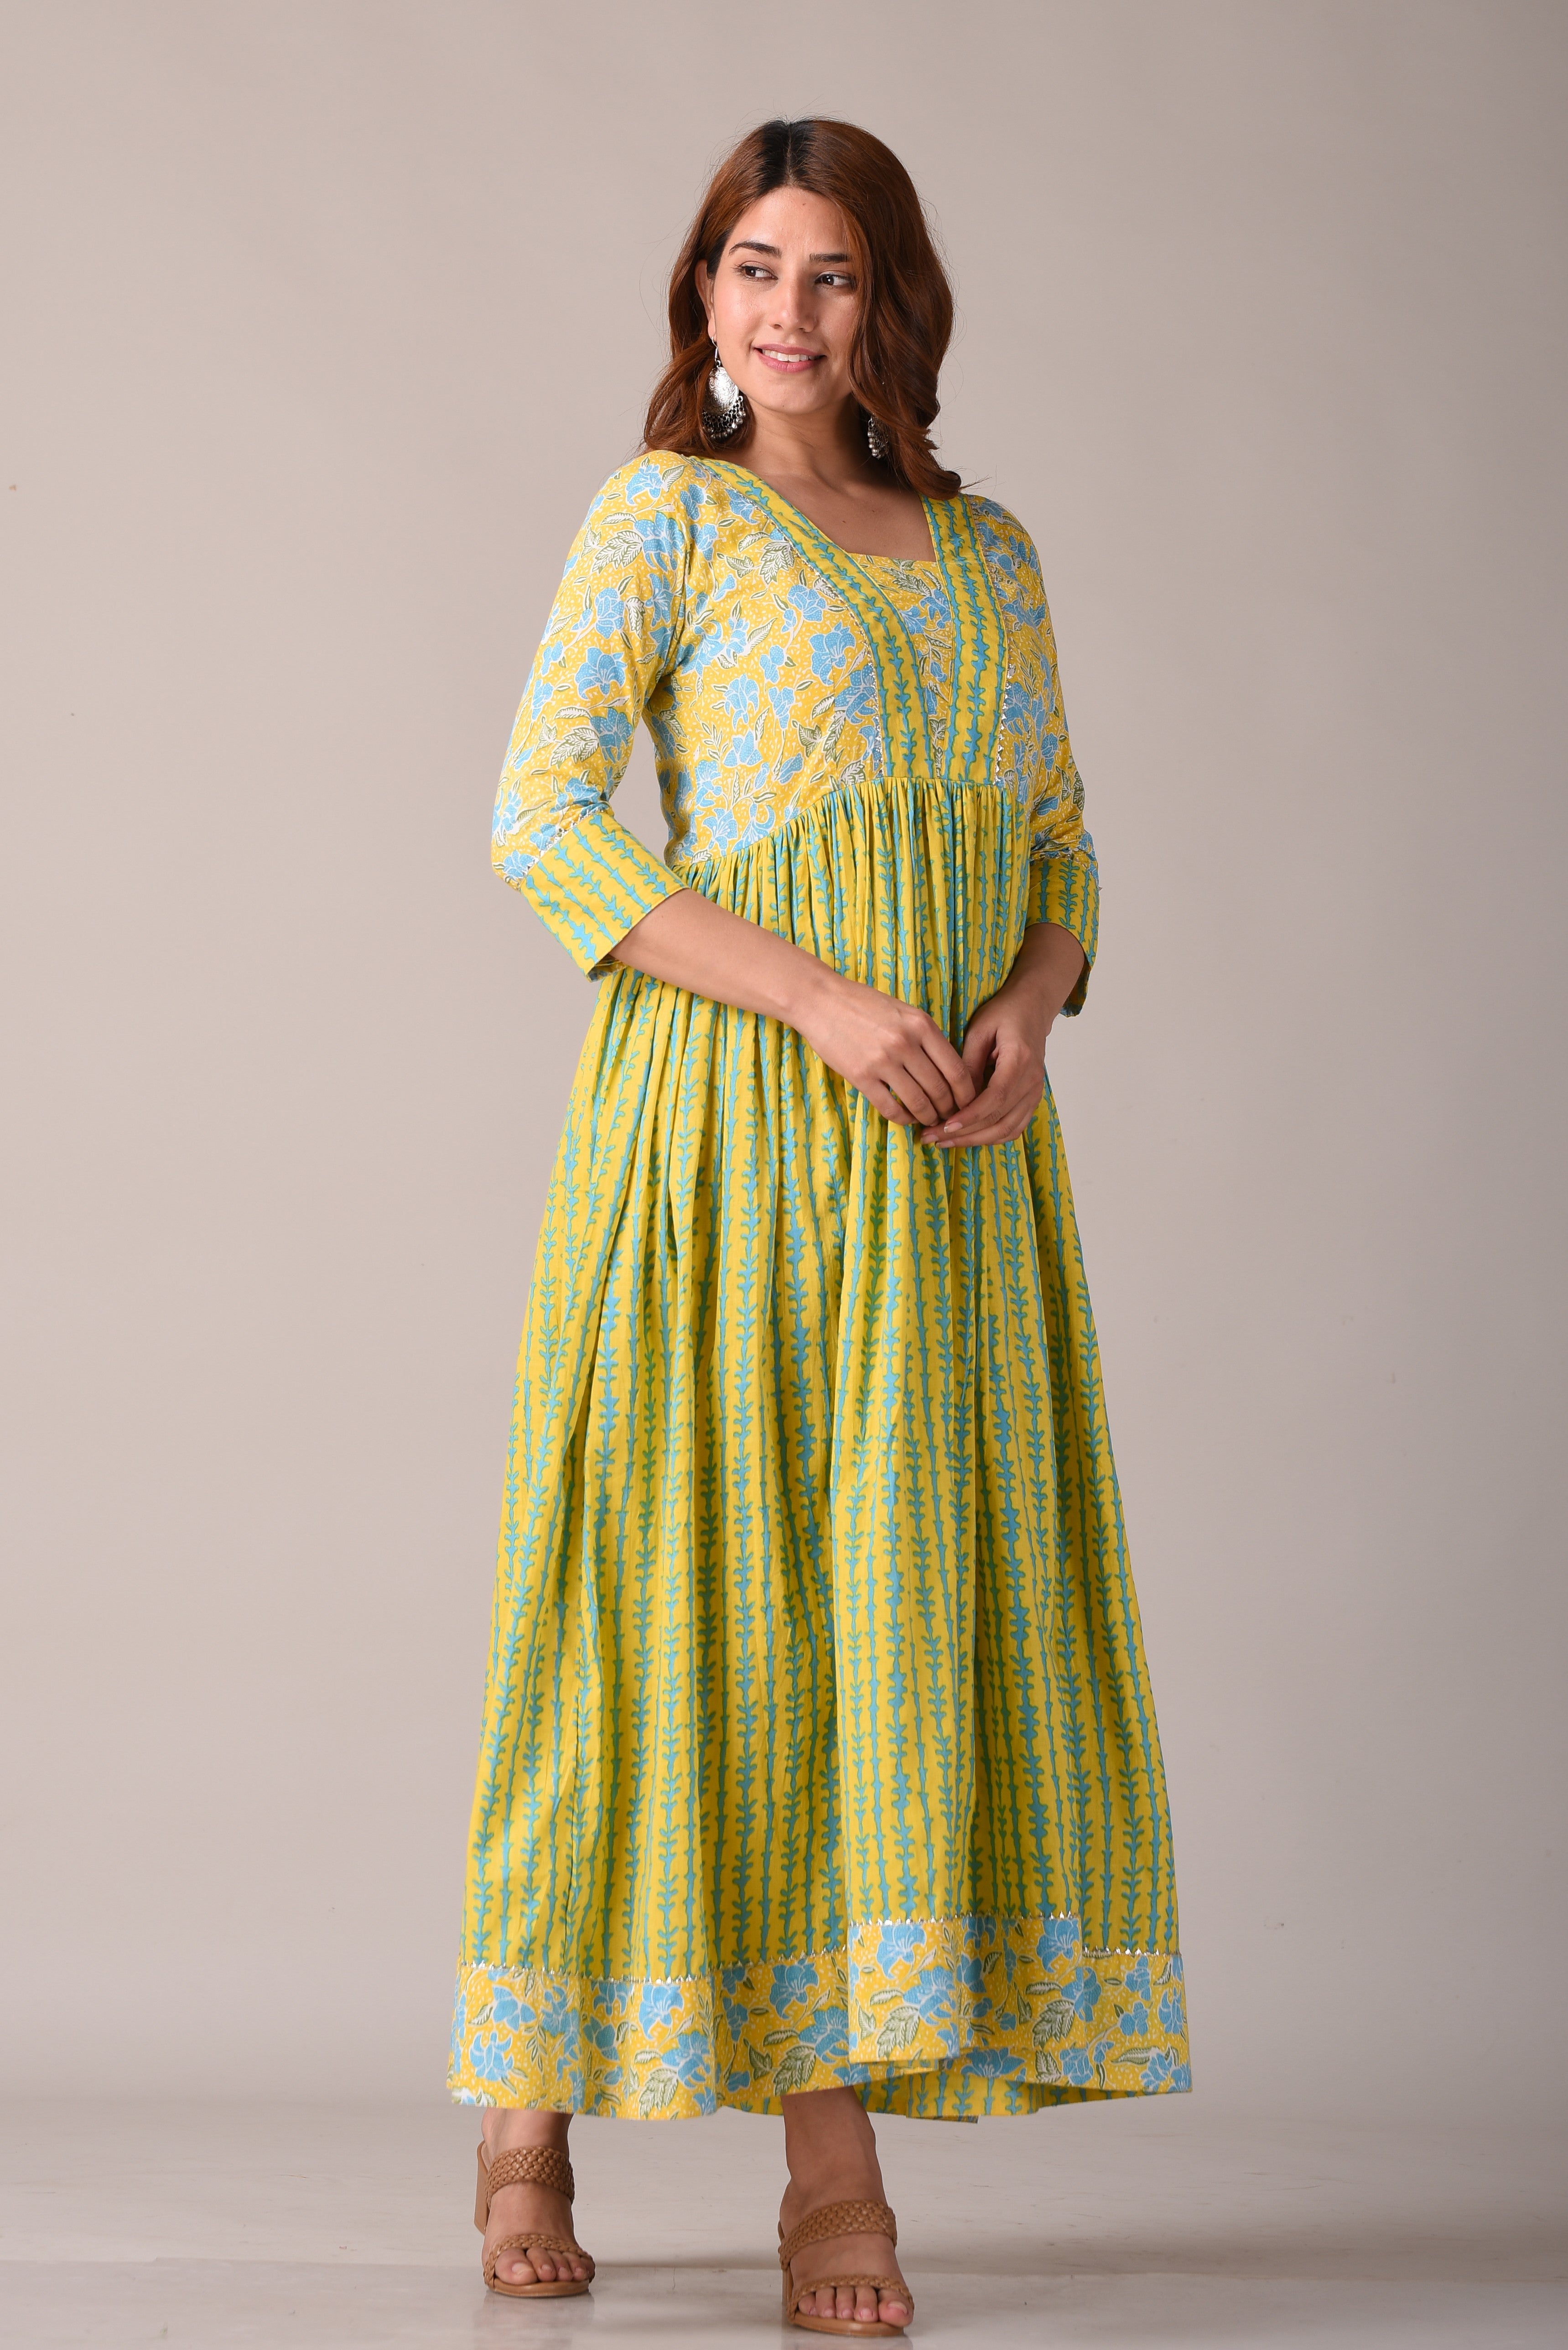 Floral Yellow Printed Pure Cotton Maxi Dress